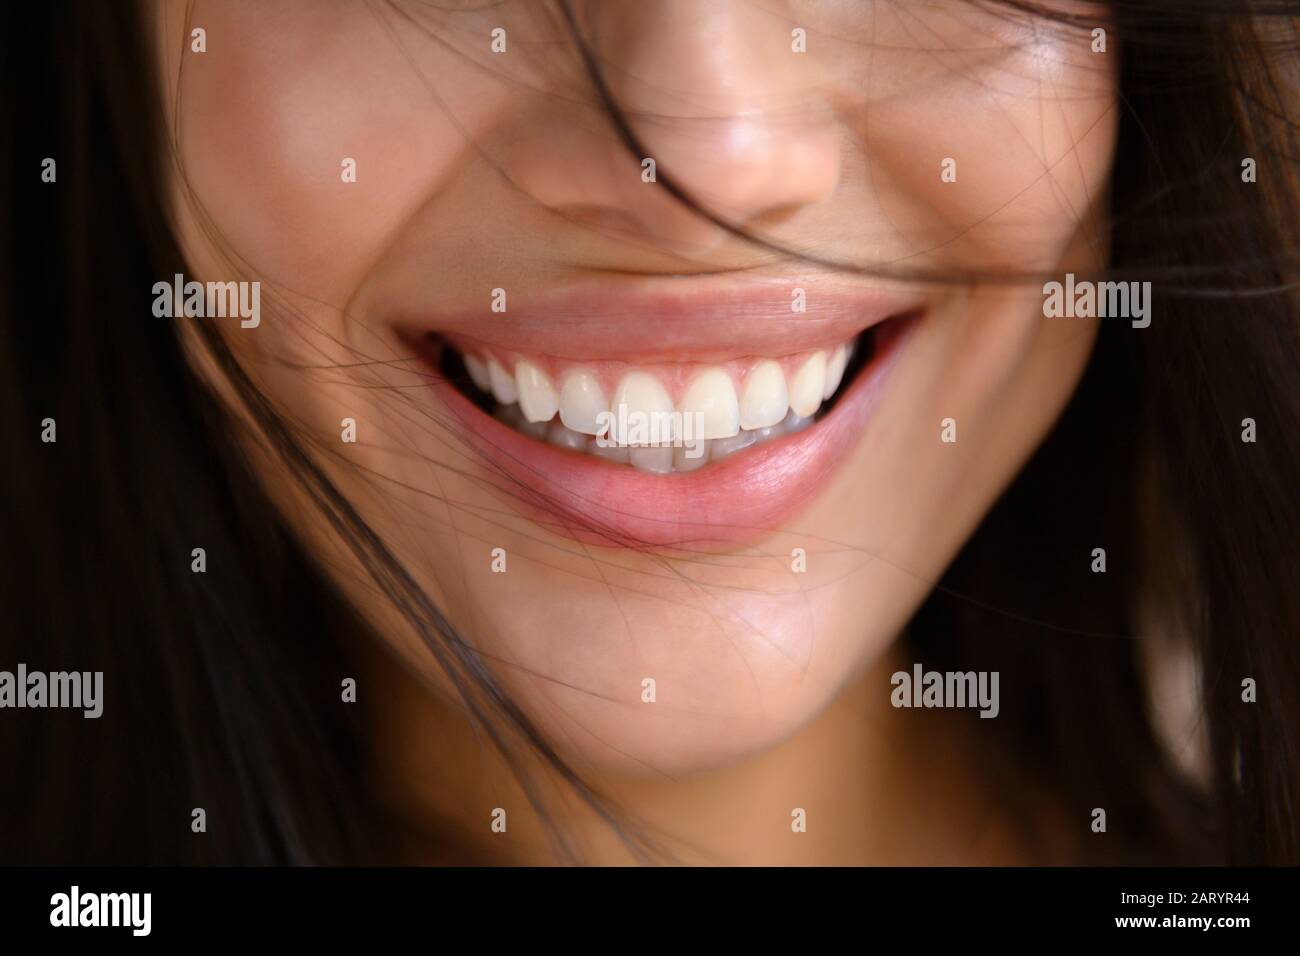 Close up of smiling woman's face Stock Photo